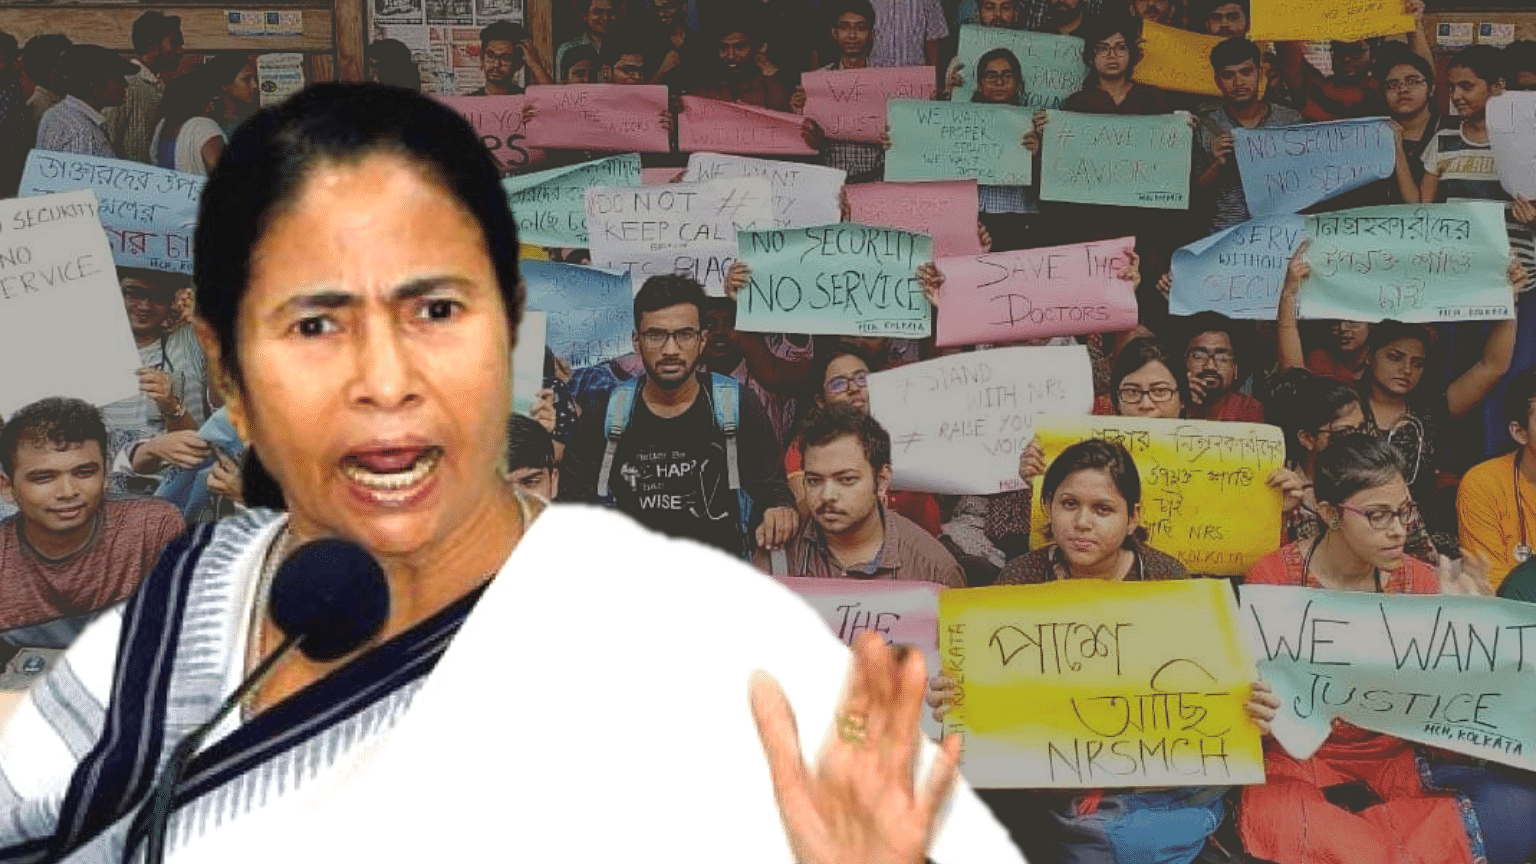 Mamata Banerjee’s handling of the ongoing doctors’ protest, in NRS and other hospitals across Bengal, has been self-defeating.